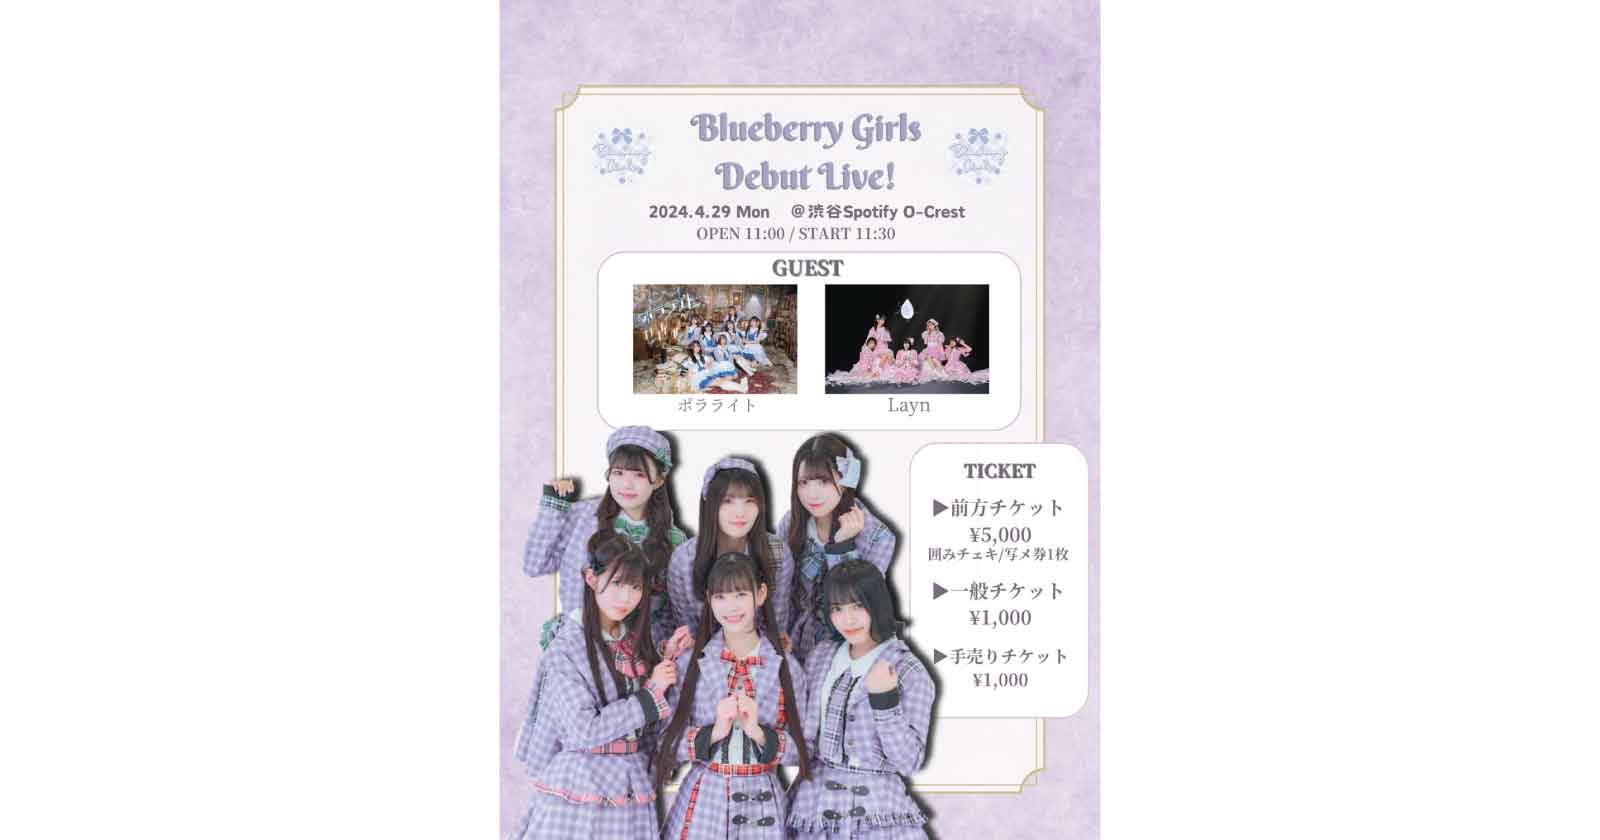 24/4/29 ① 「Blueberry Girls Debut Live!」